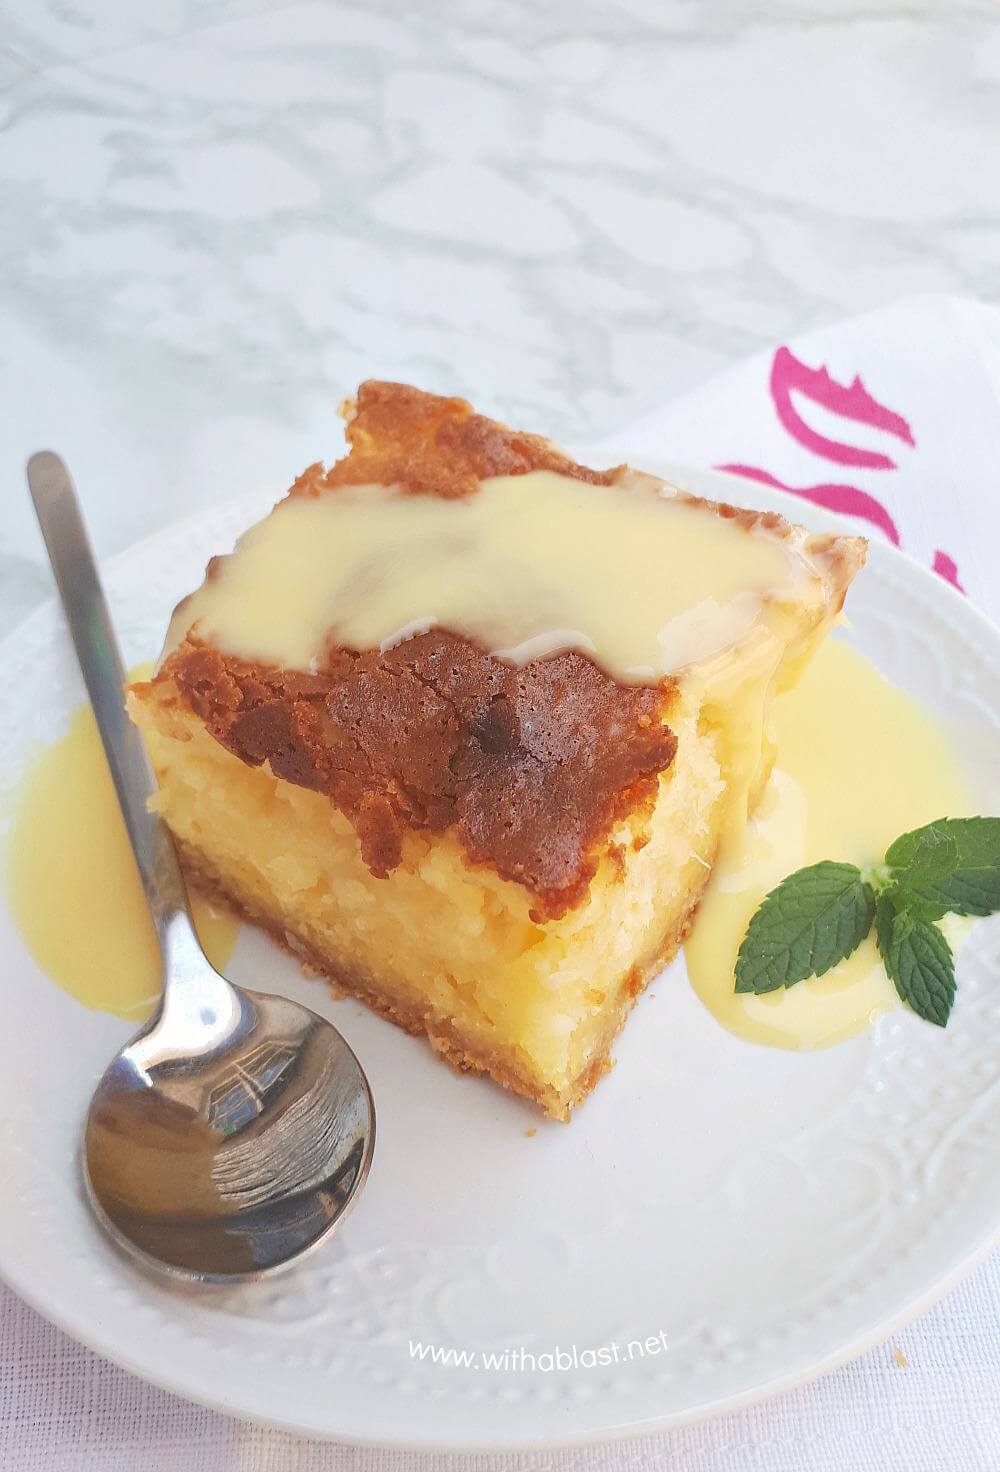 Pineapple Dessert Recipe Roundup by top Hawaii blog Hawaii Travel with Kids: Gooey Coconut Pineapple Butter Cake is a moist, delicious cake and no need for frosting. Easy cake starting with a cake mix and with cream cheese too!